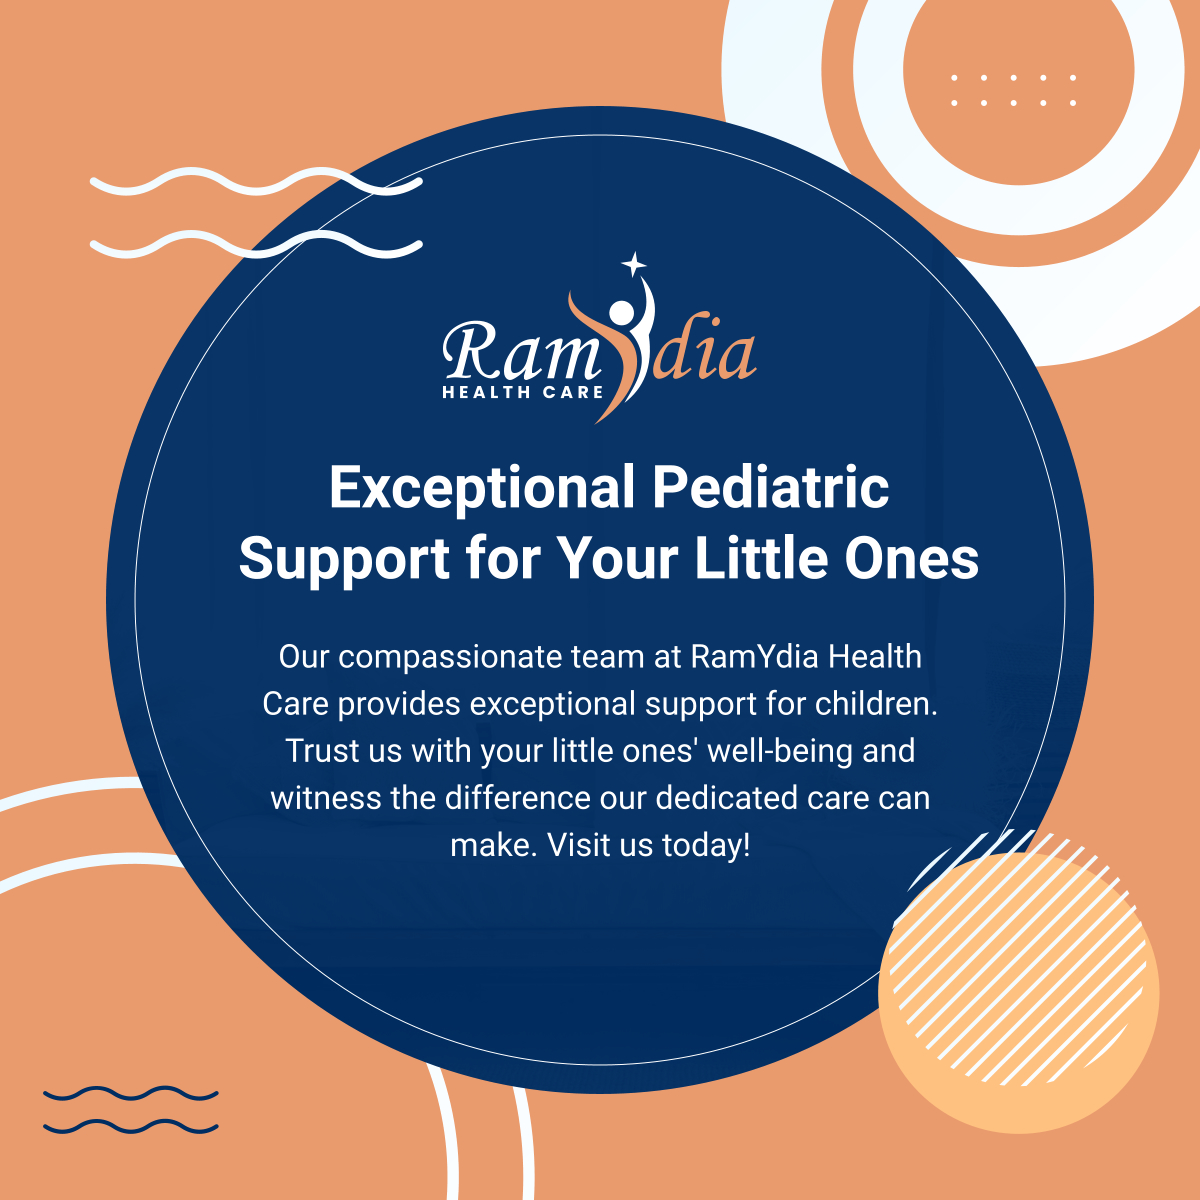 Exceptional Pediatric Support for Your Little Ones

#PediatricSupport #PerthAmboyNJ #HomeHealthCare